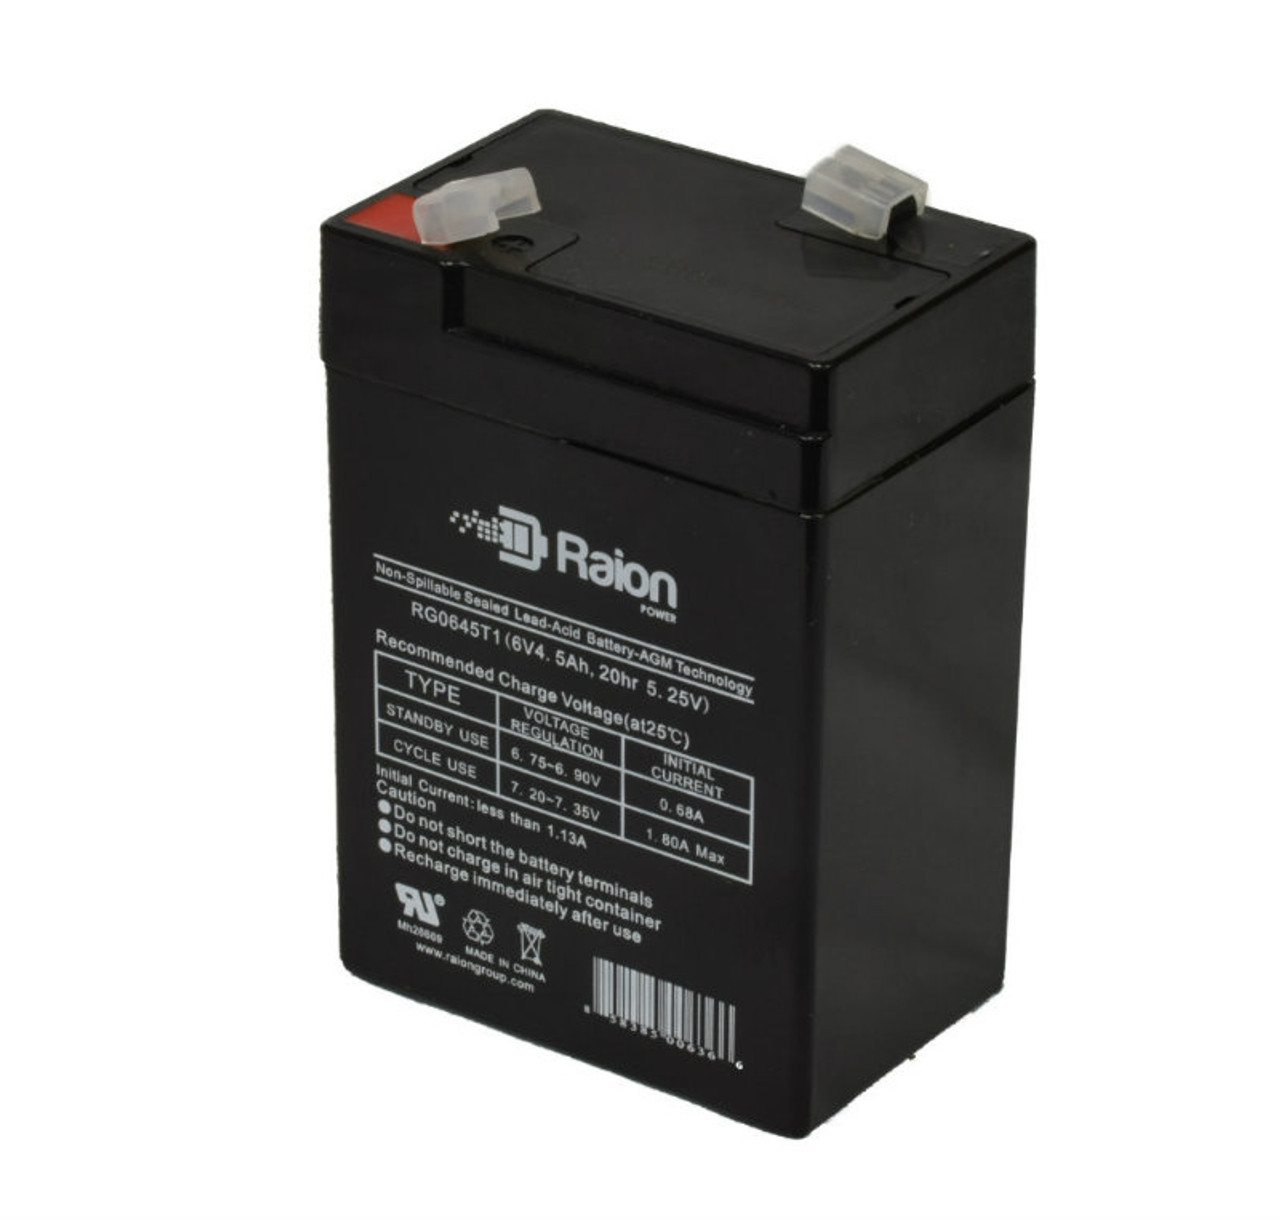 Raion Power RG0645T1 6V 4.5Ah Replacement Battery Cartridge for MCA NP5-6CUT